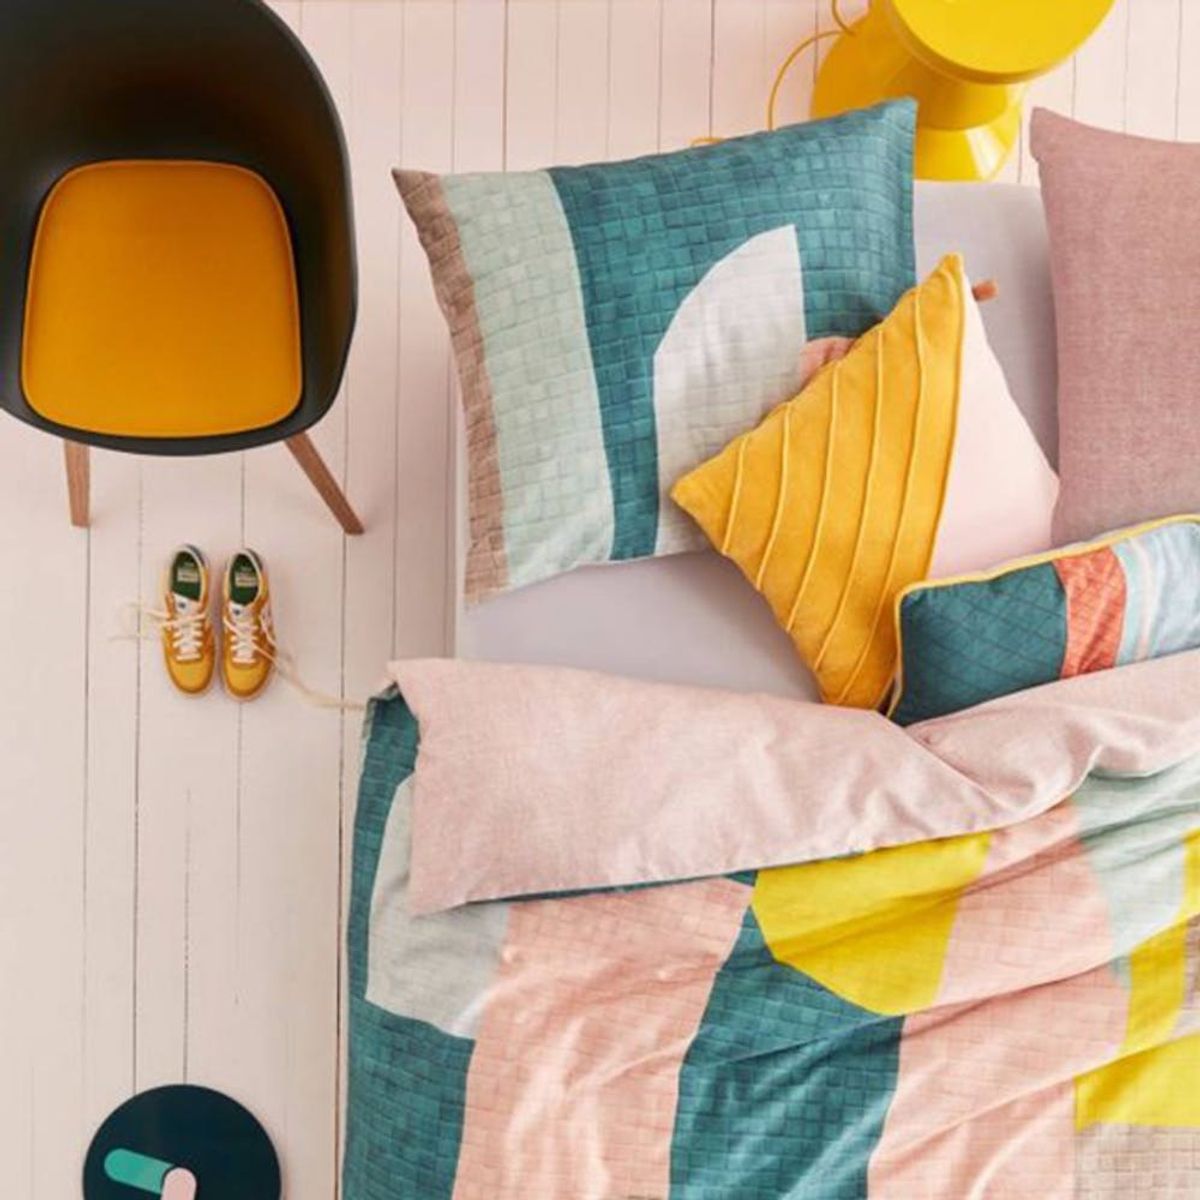 12 Colorful Sheets and Duvets for a Bedroom Refresh